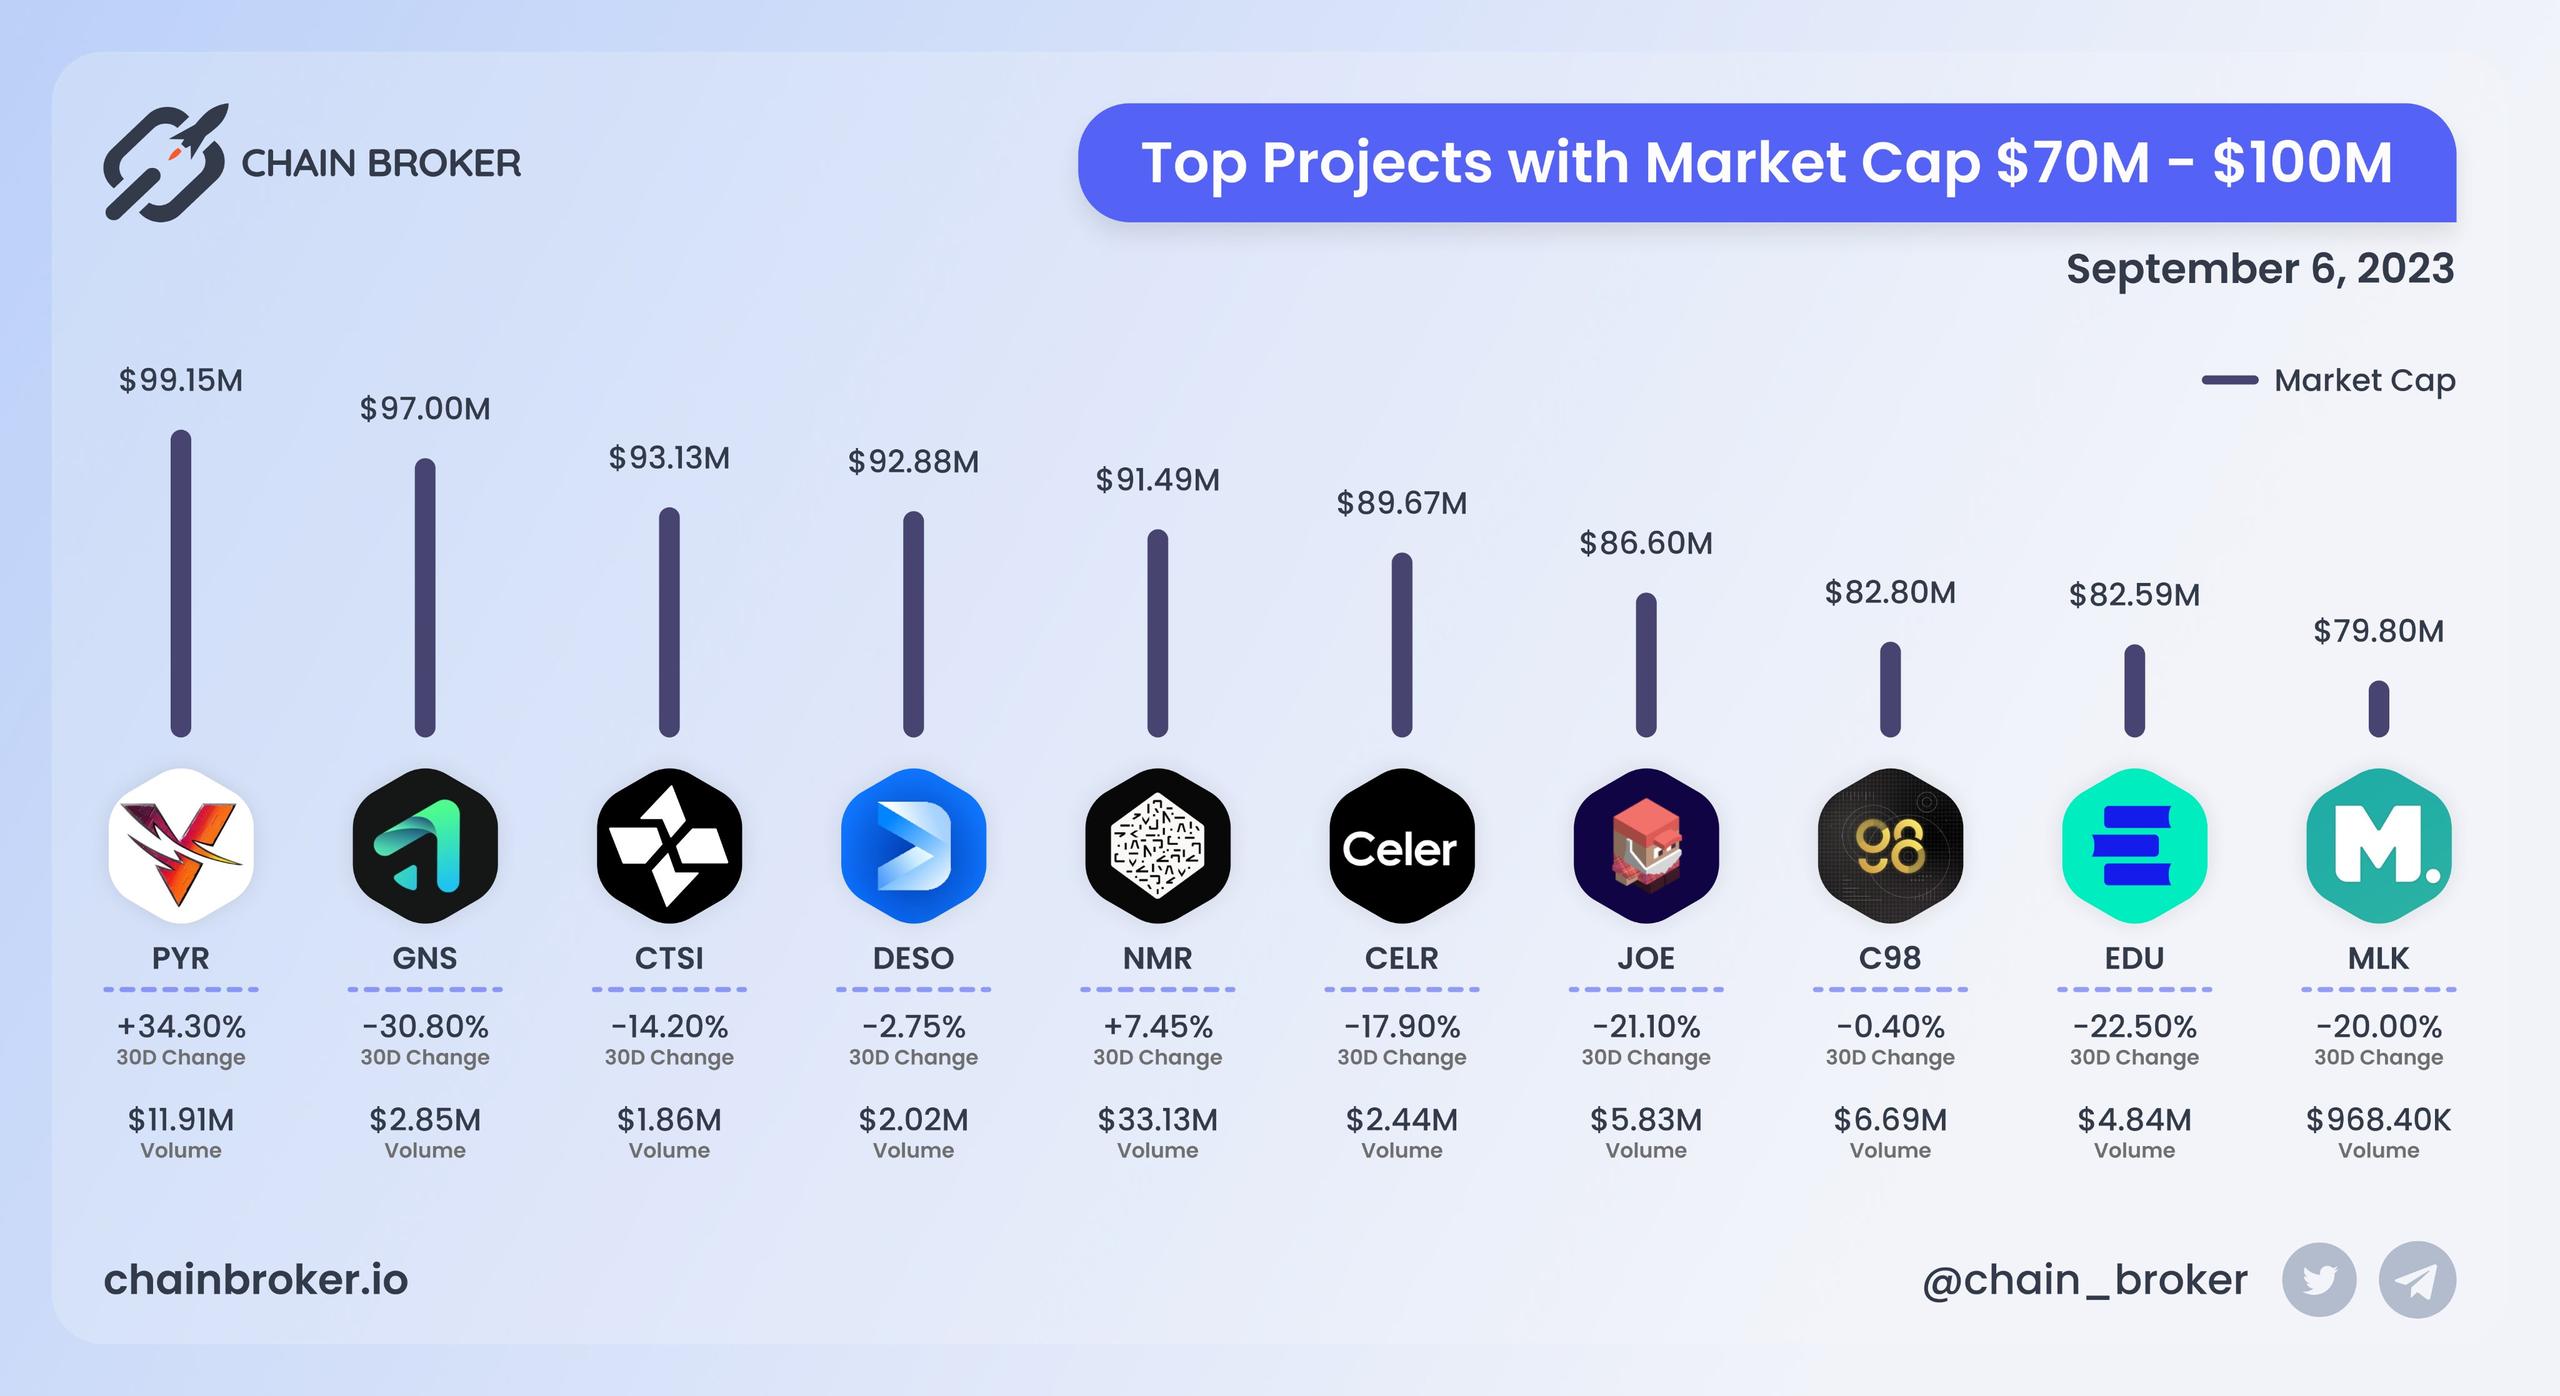 Top projects with Market Cap $70M - $100M